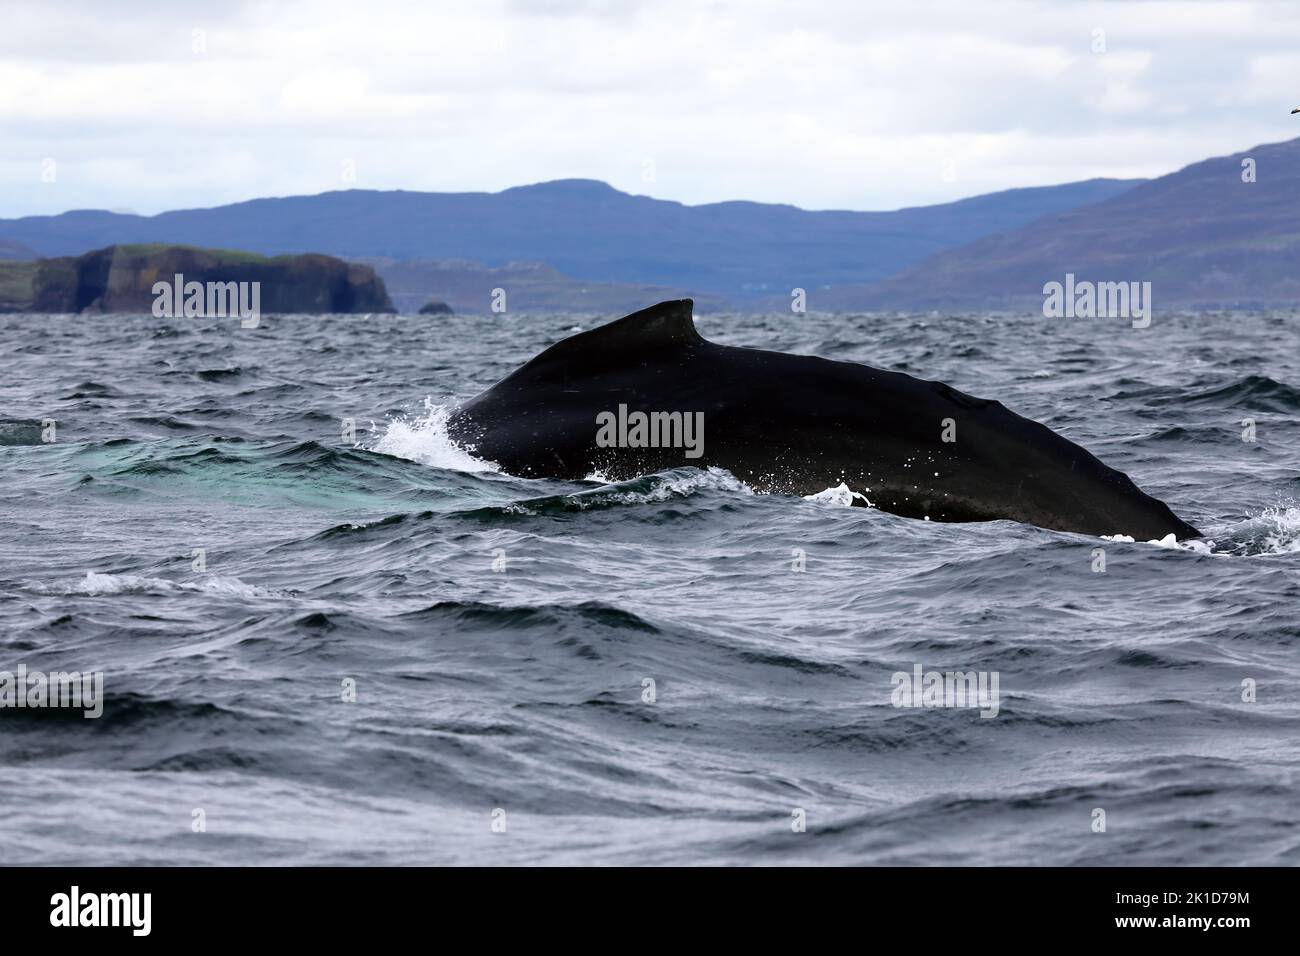 17 Sep 2022 Isle of Mull, Scotland - Rare sighting of Humpback Whale off the coast of the Isles of Mull & Iona in the Inner Hebrides of Scotland Stock Photo